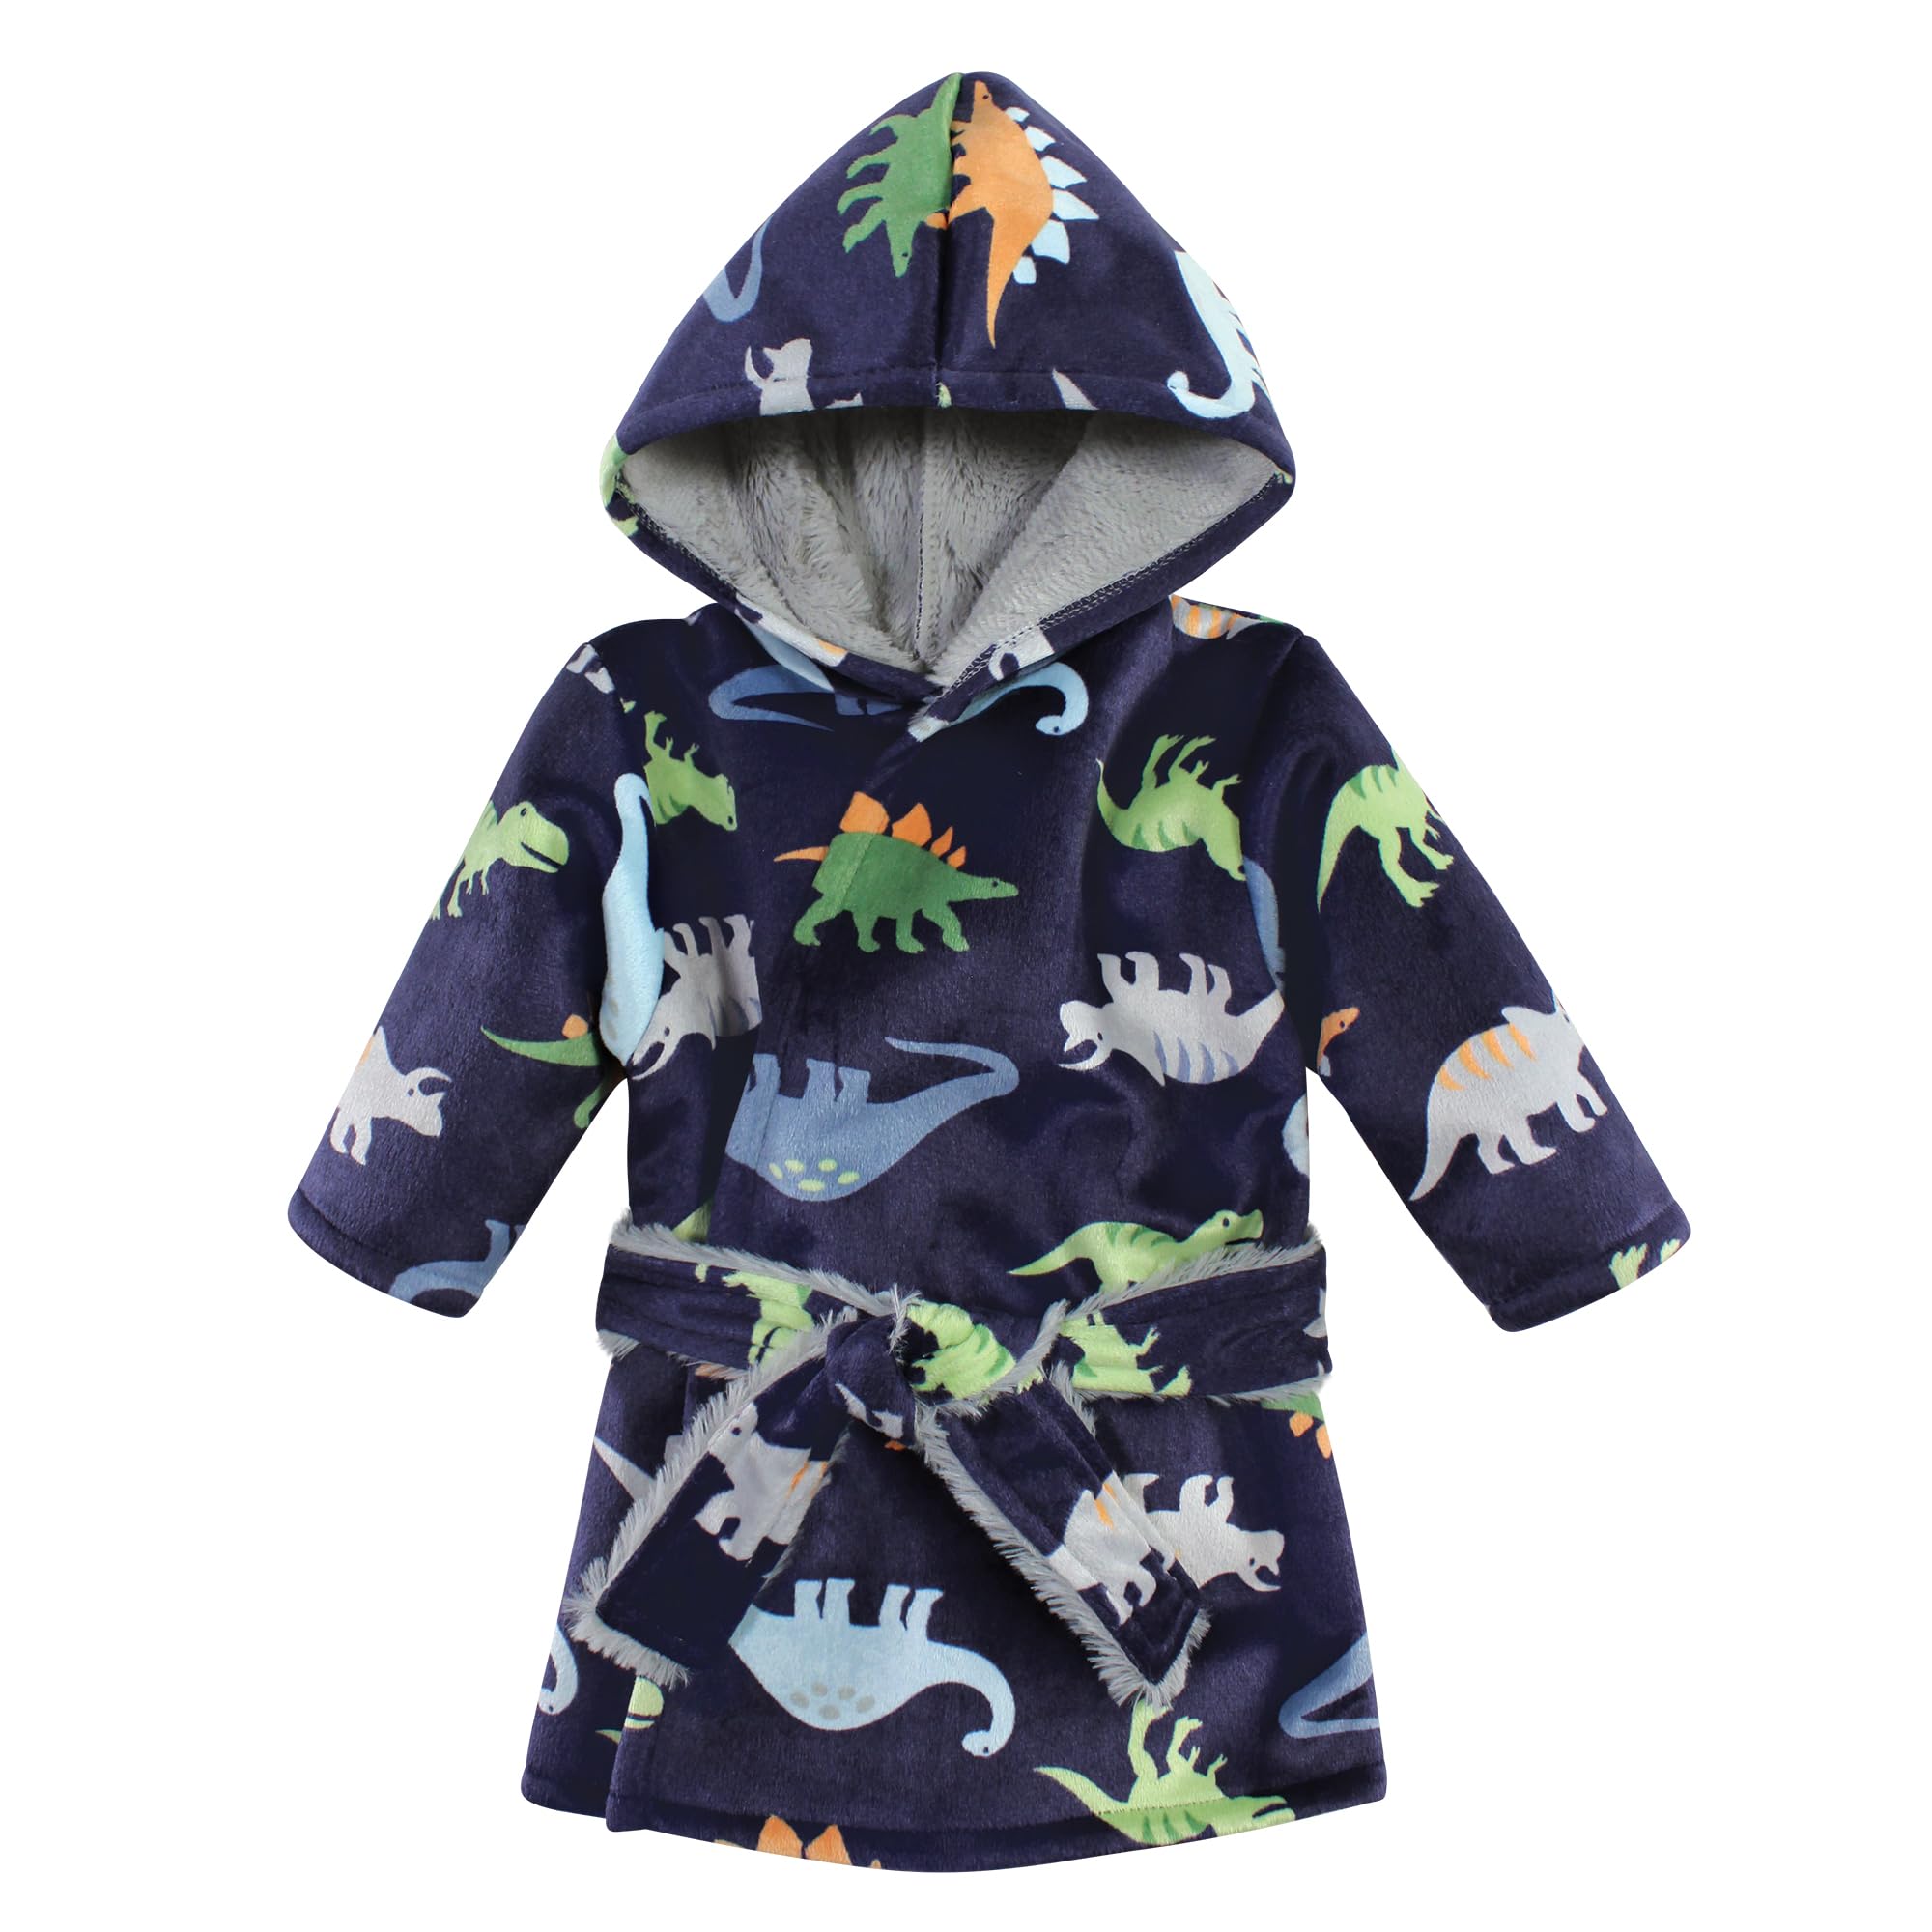 Hudson Baby Unisex Baby Mink with Faux Fur Lining Pool and Beach Robe Cover-ups, Dinosaurs, 12-18 Months